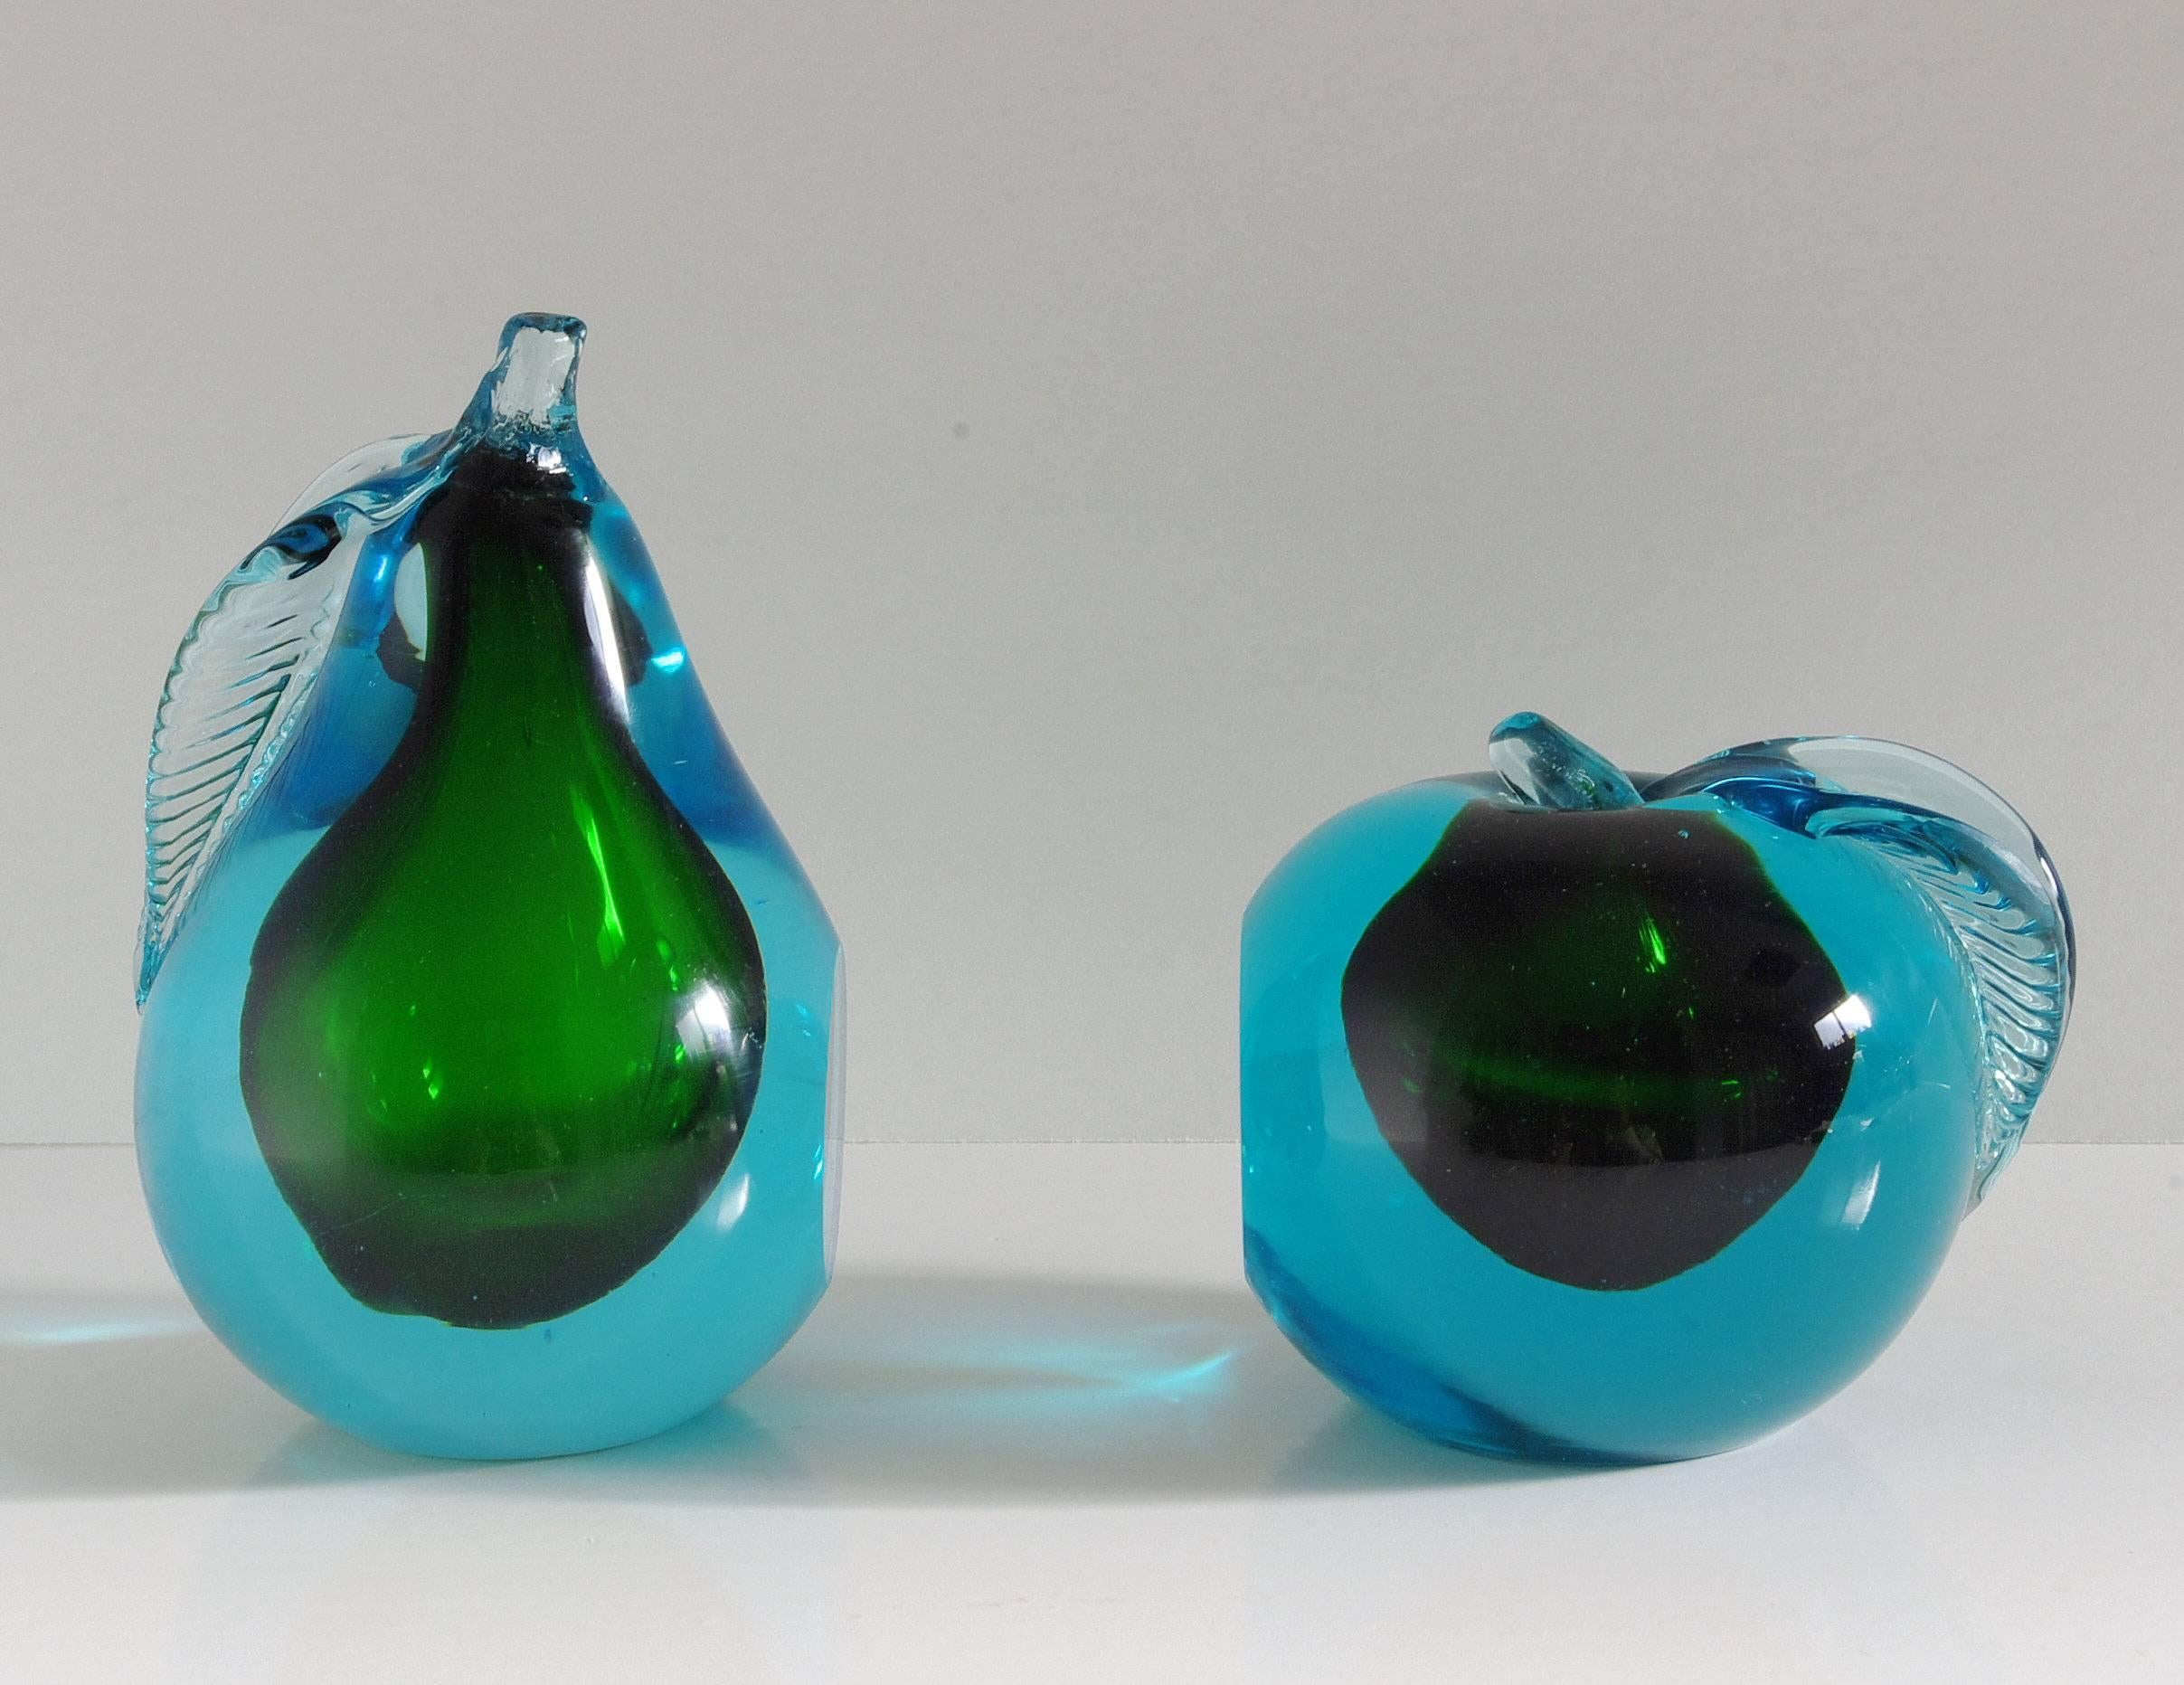 Vintage Italian set of blue and green Murano glass book ends carefully hand blown in Sommerso technique to the shape of an apple and pear / Made in Italy in the 1960's.
Pear Diameter: 3.5 inches / Pear Height: 6 inches
Apple Diameter: 4 inches /